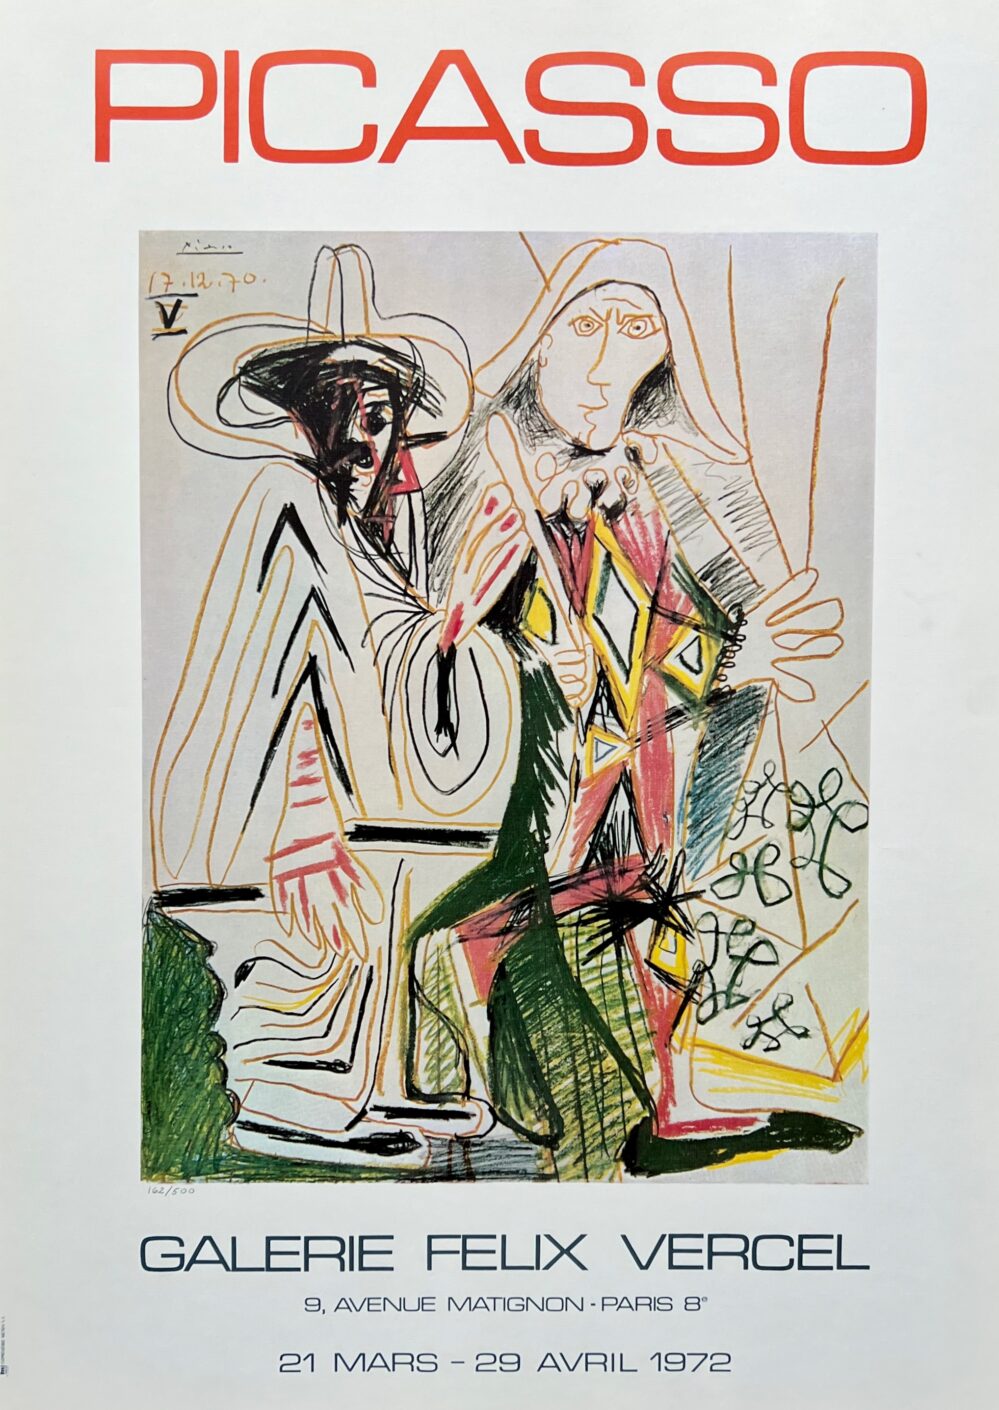 Pablo Picasso GALERIE FELIX VERCEL 1972 Plate Signed Limited Edition Lithograph